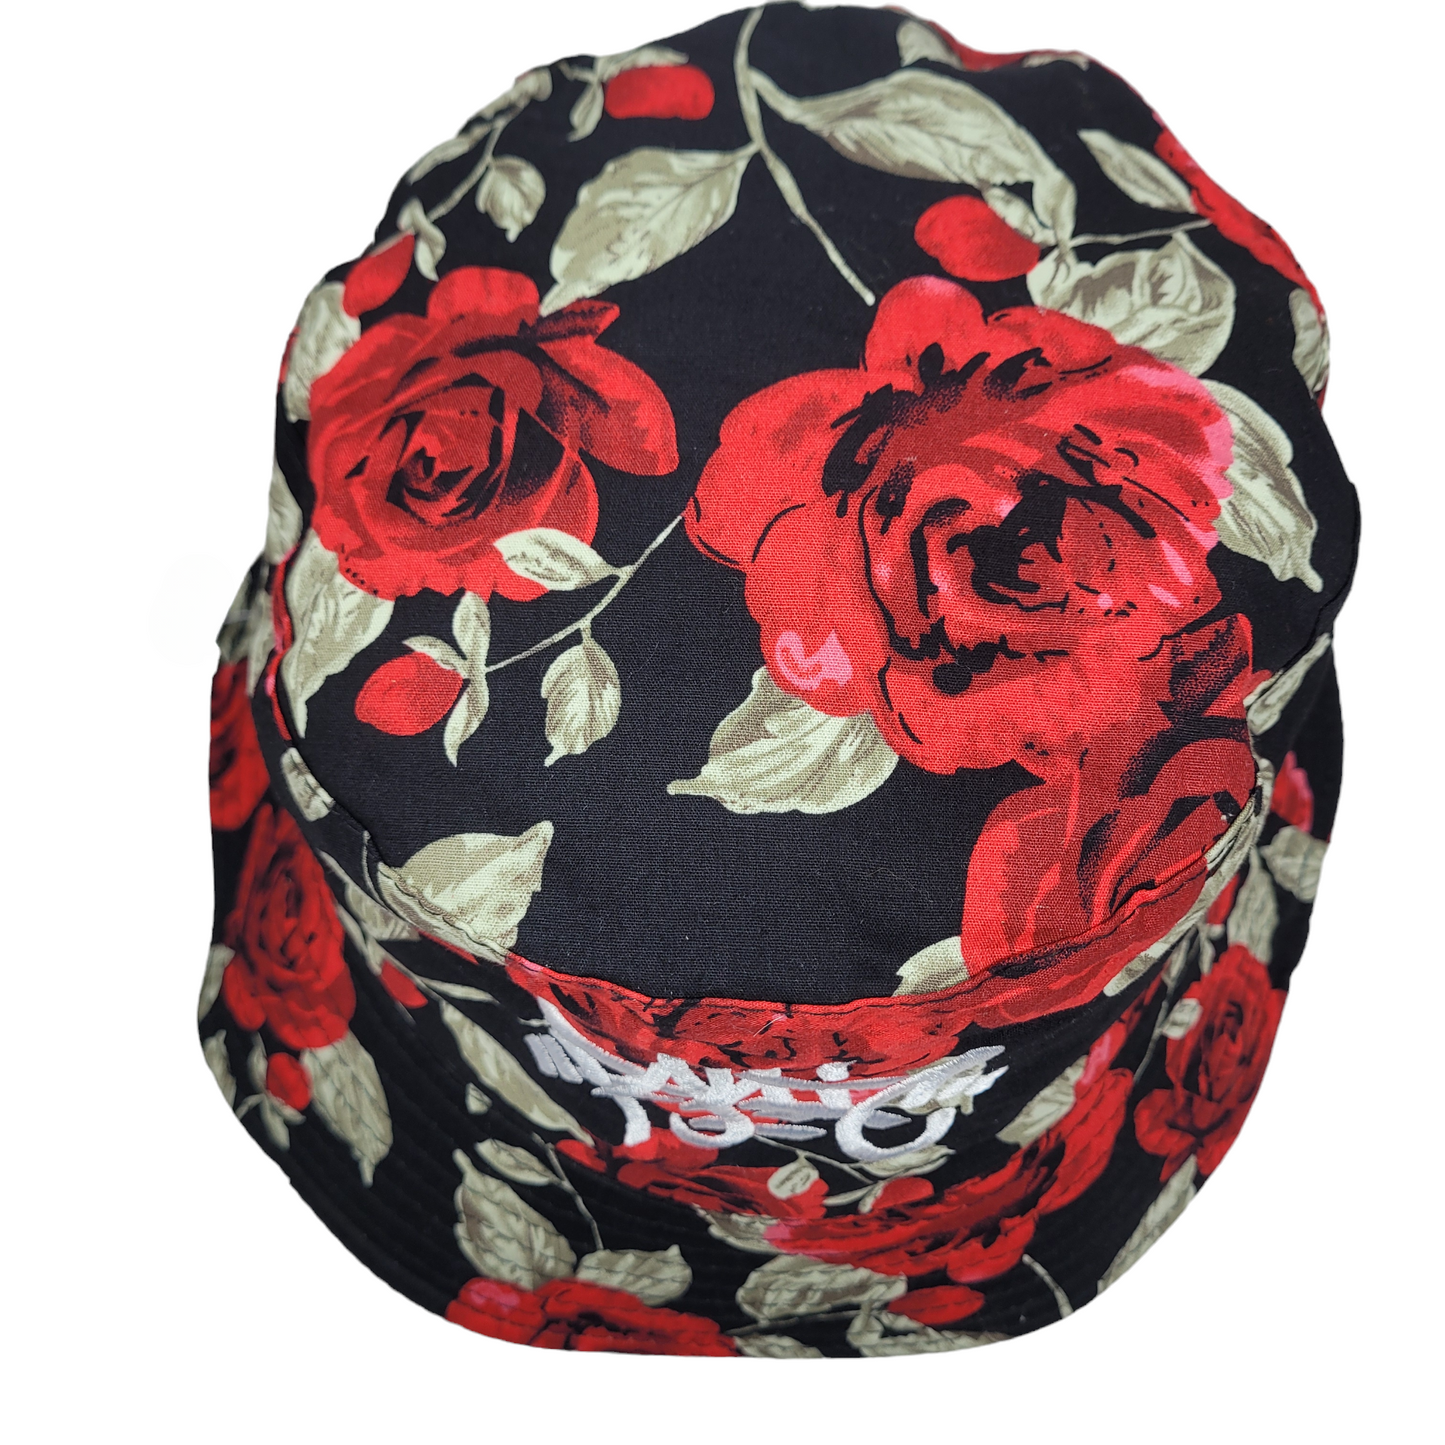 THE ROSES FLORAL BUCKET HAT IN BLACK